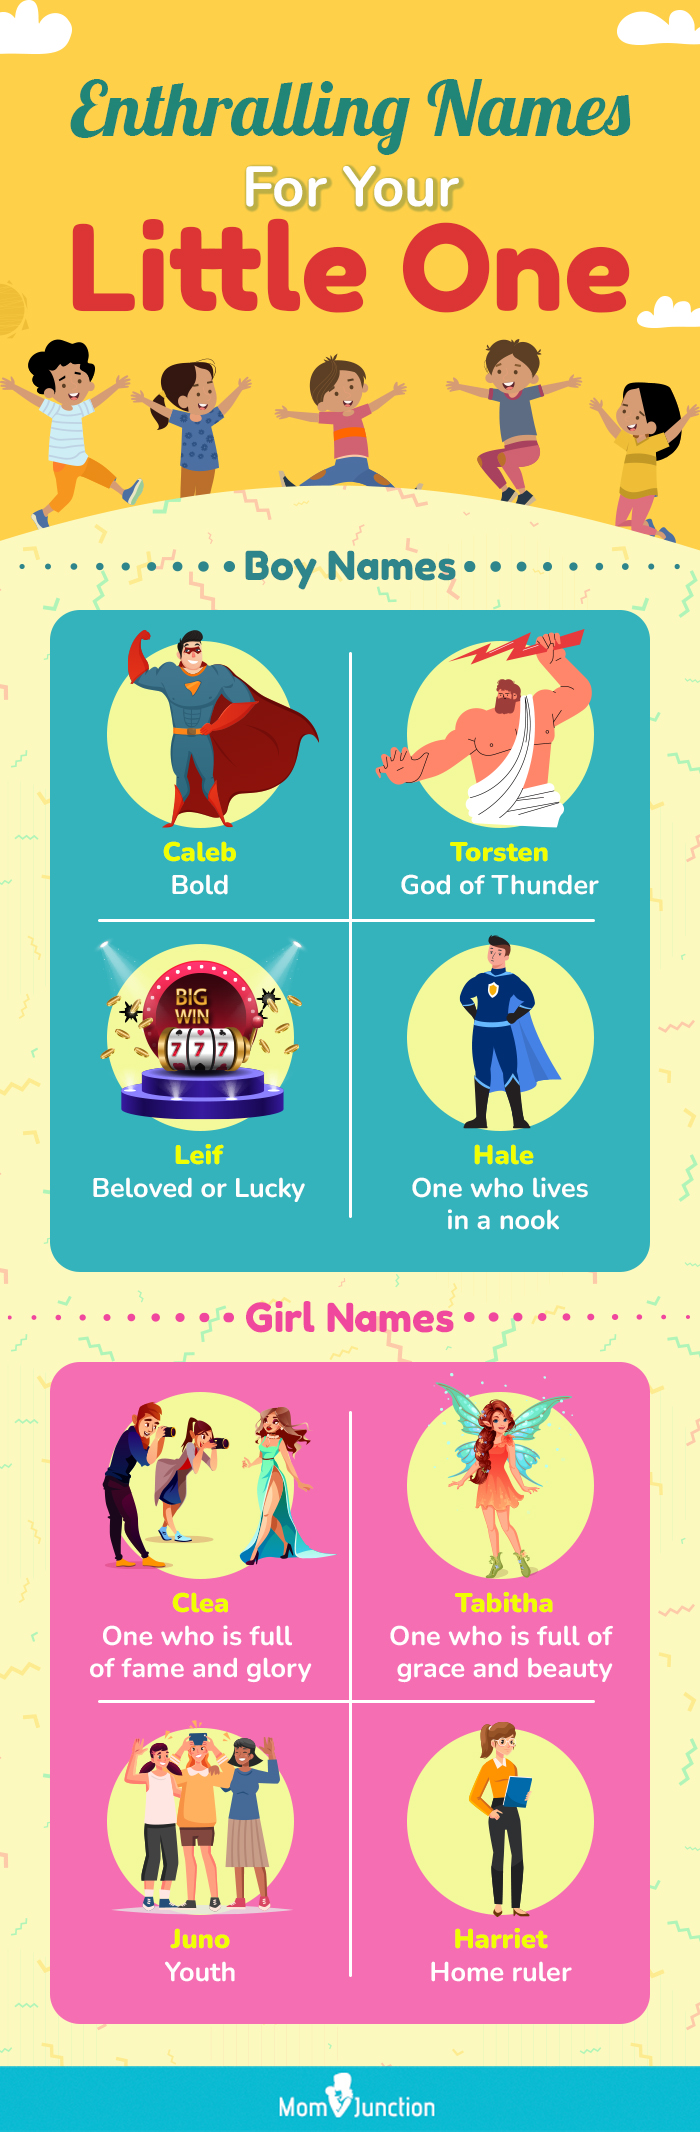 enthralling names for your little one (infographic)